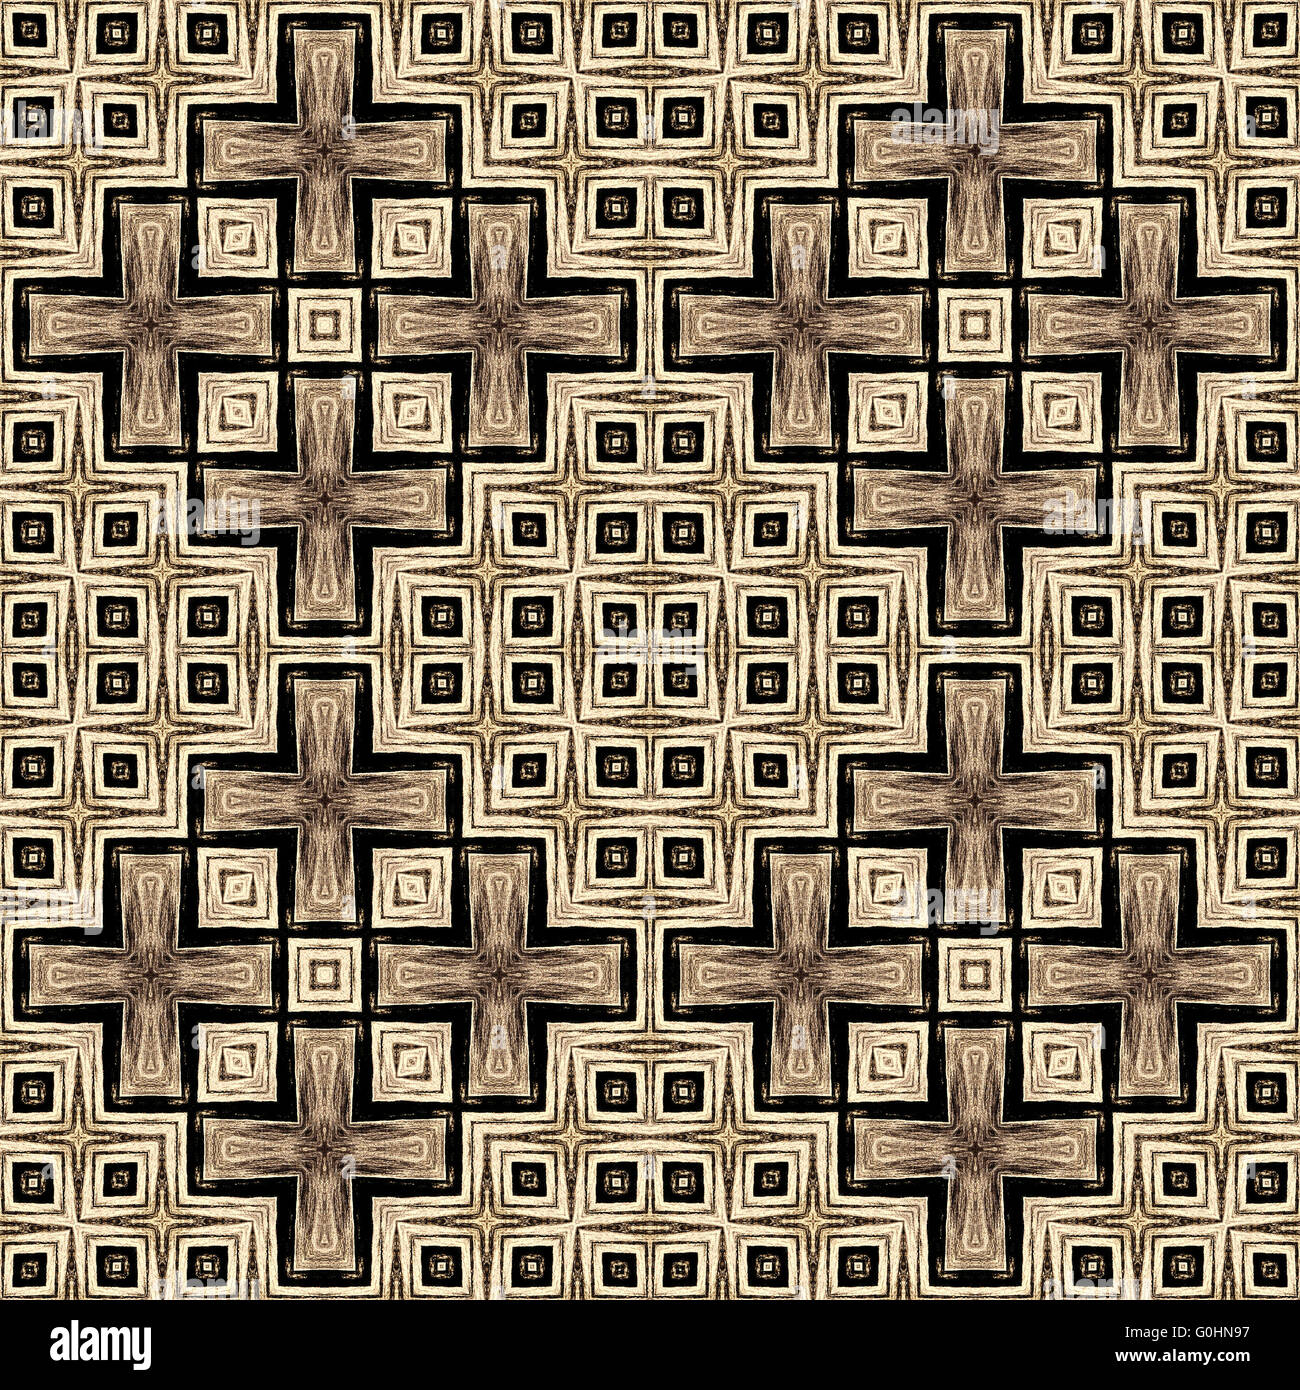 Seamless kaleidoscopic wallpaper tiles pattern drawn with black soft pencil based on wooden texture Stock Photo